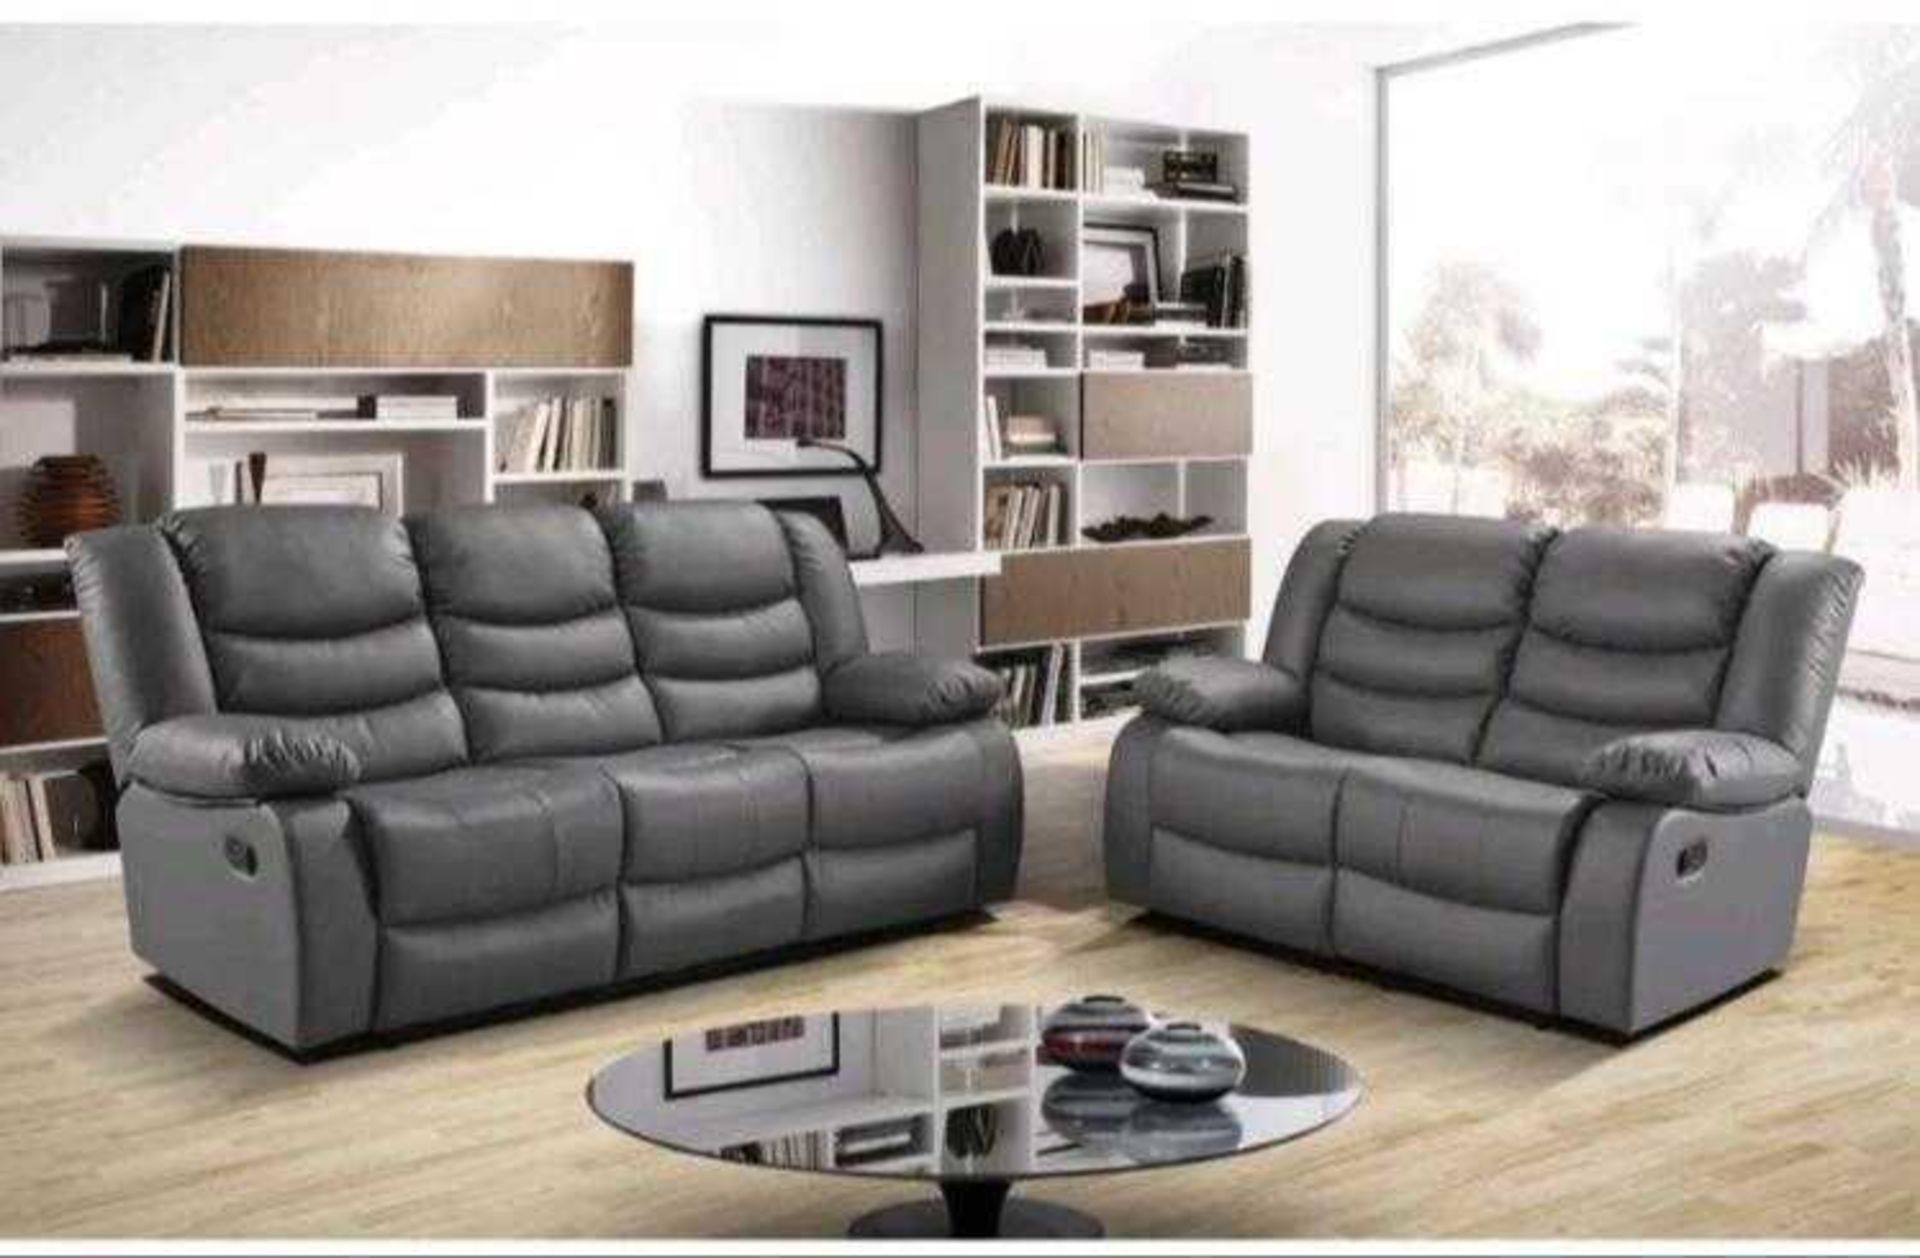 BRAND NEW Malaga 3 + 2 seater manual recliner suite. RRP: £1,599